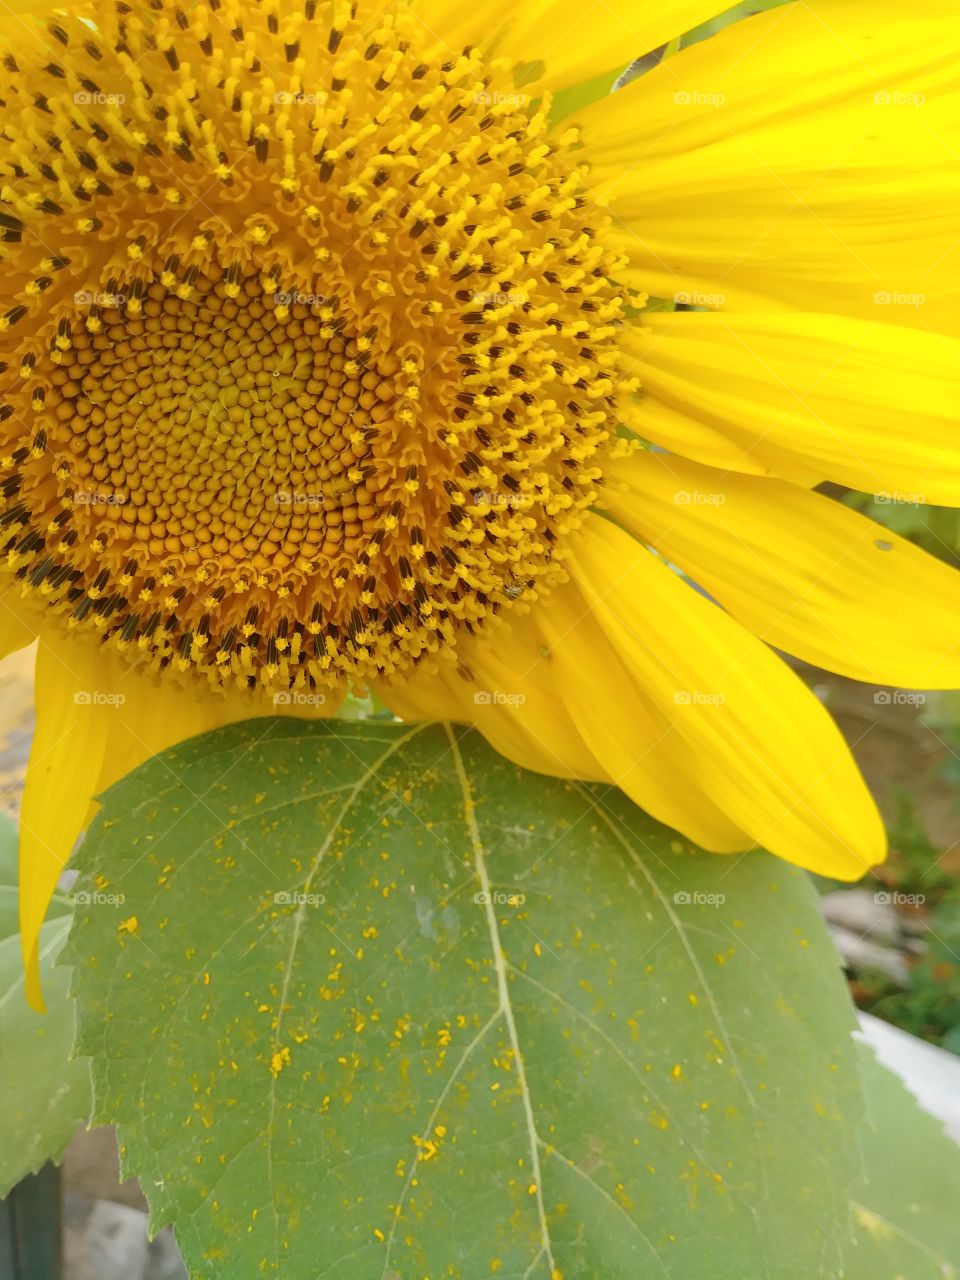 Giant yellow sunflower seed head closeup with green leaf and very nice petals